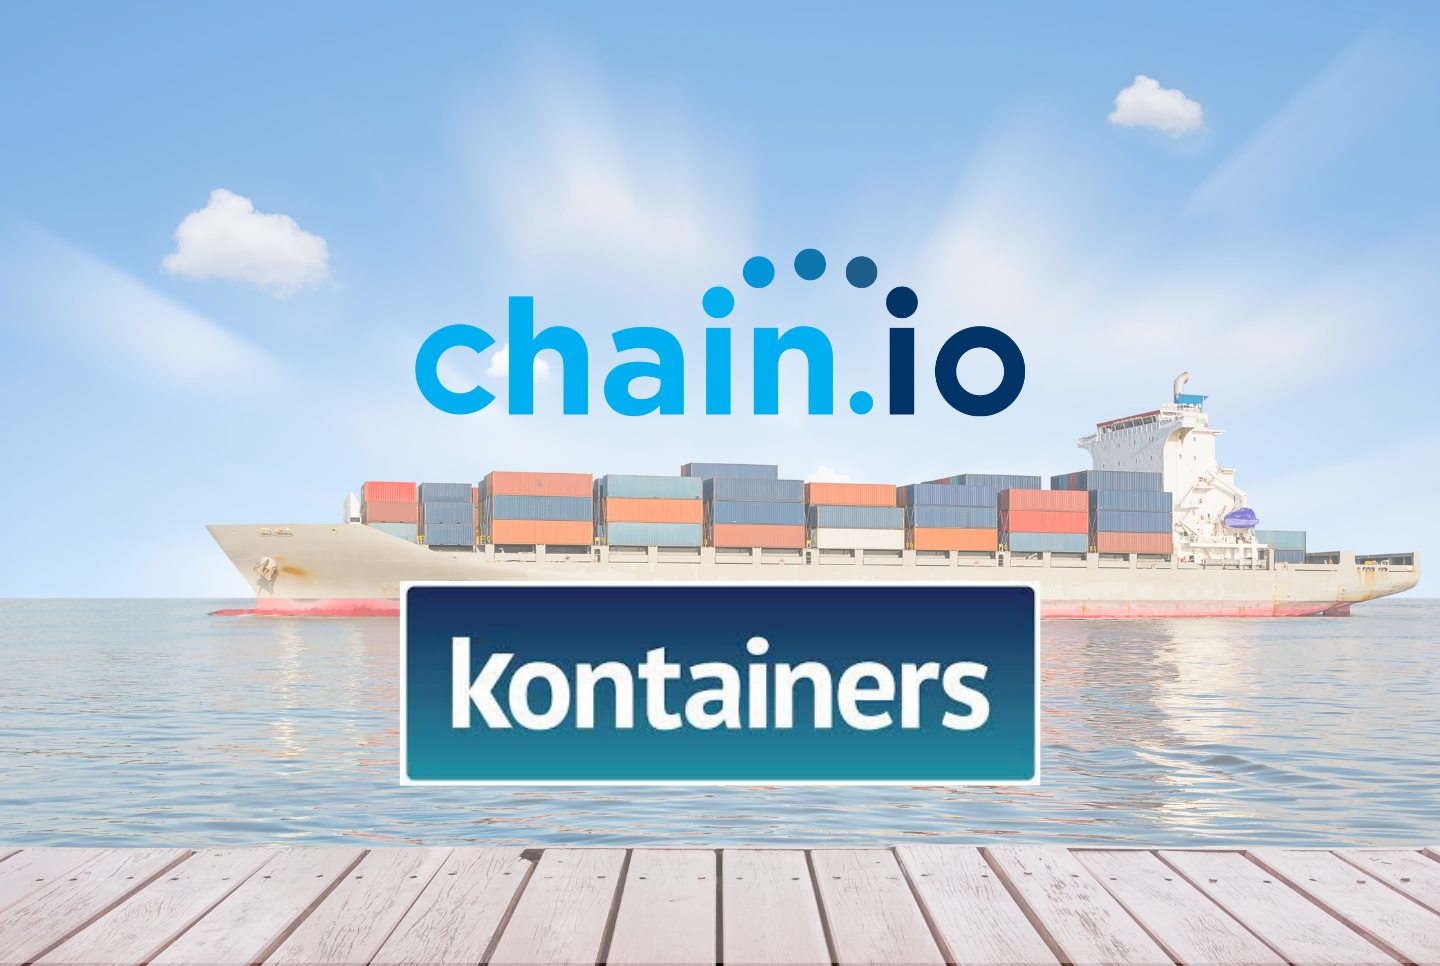 By connecting with Chain.io, Kontainers is able to bring enhanced TMS integration to both new and existing clients, providing a more seamless digital freight experience.